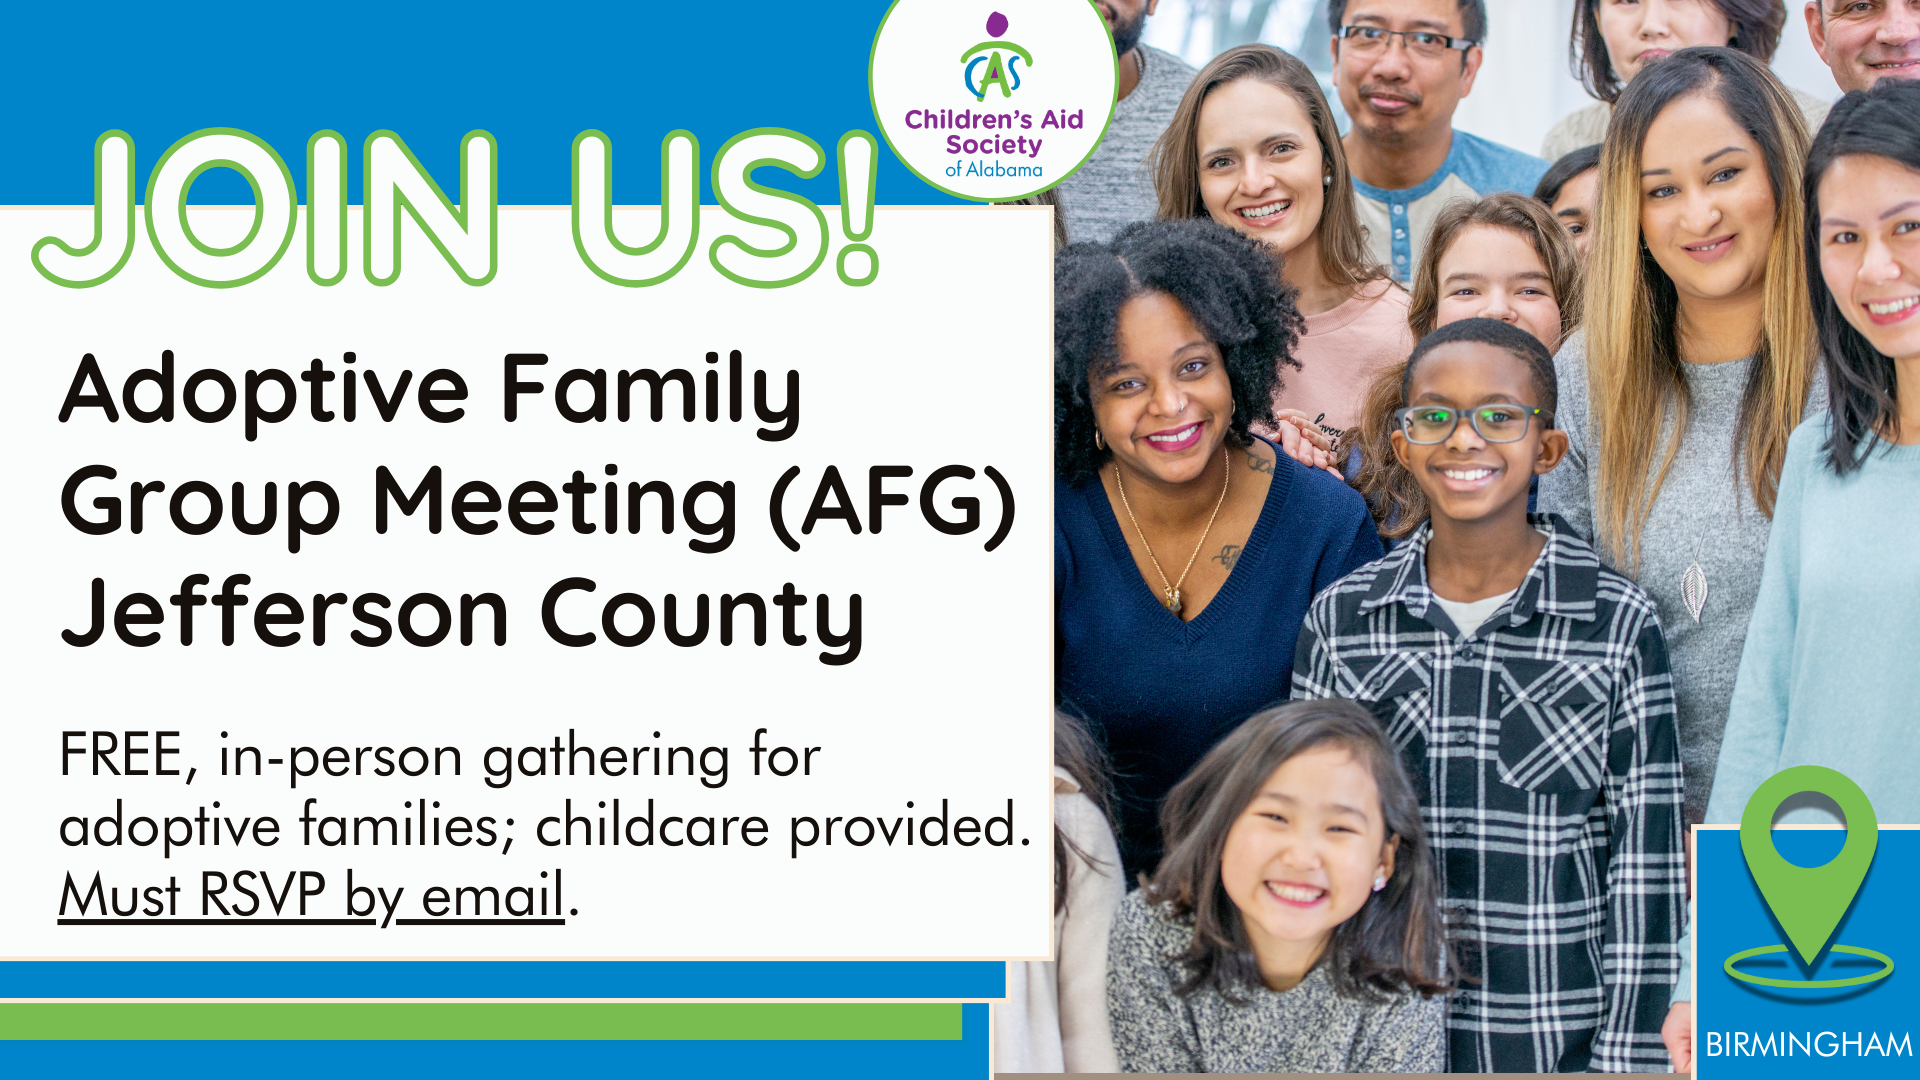 APAC offers FREE support groups that meet throughout the state, providing education and social interaction for adoptive parents and their children. The Jefferson County group meets in Birmingham, must RSVP in advance.